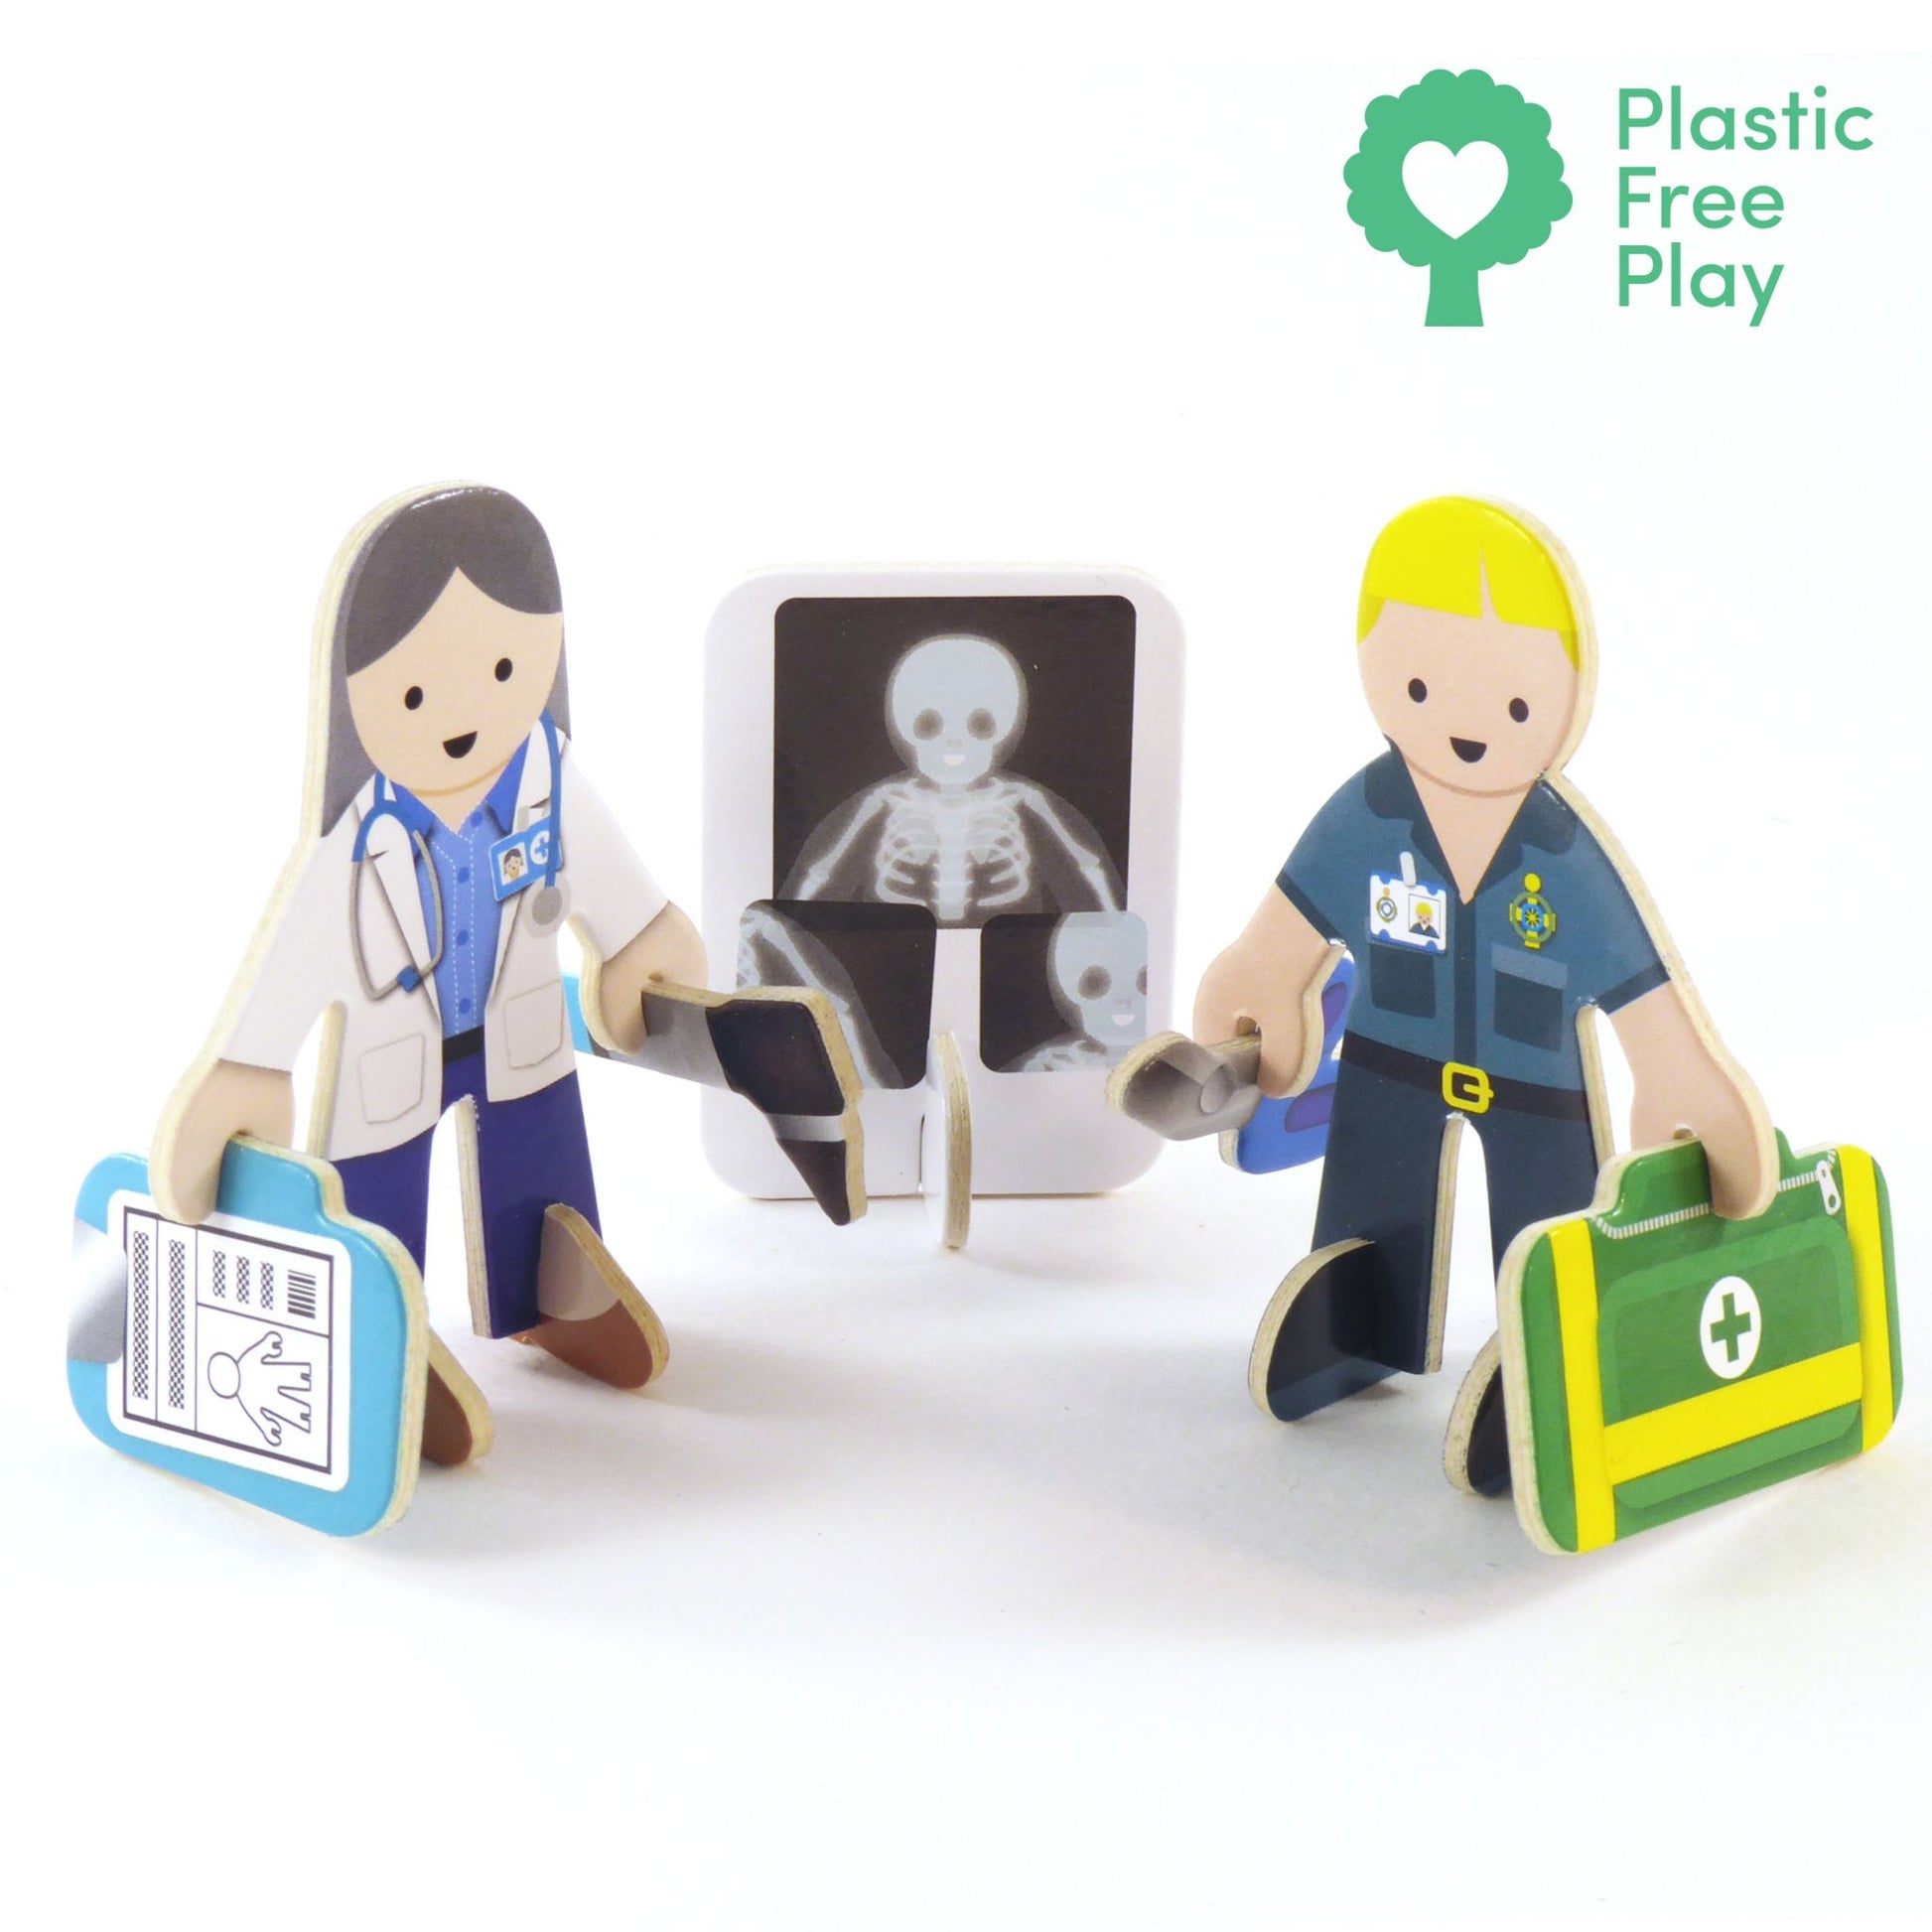 Check Up Time Build and Play Set - doctor and paramedic